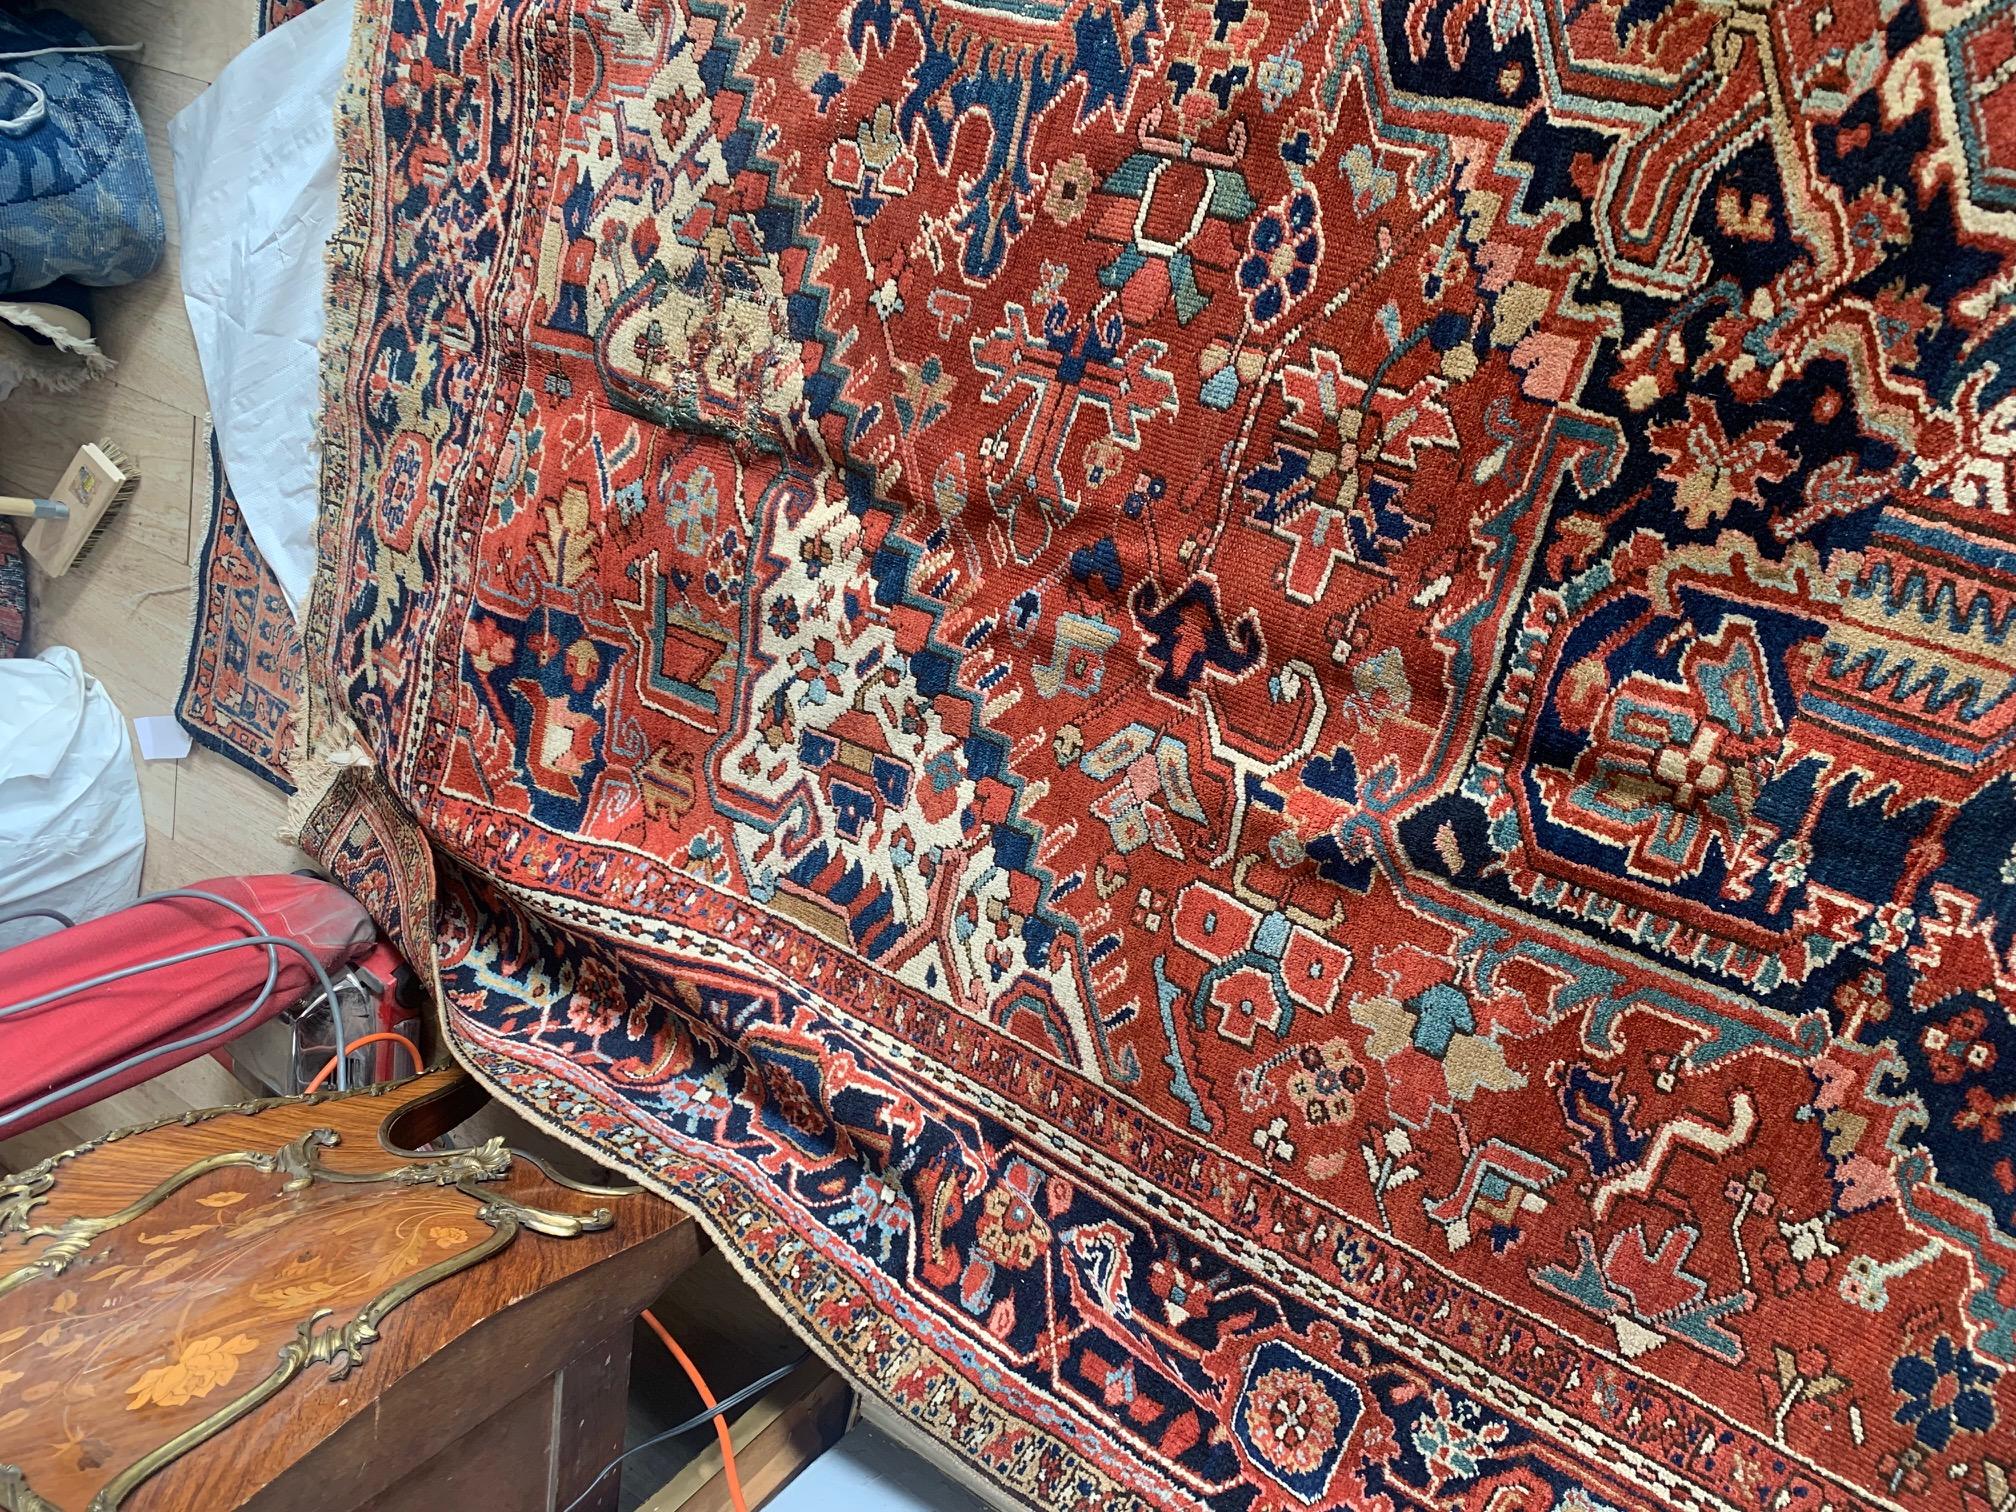 Introducing our Handmade Antique Persian Style Heriz Rug, a timeless piece measuring 9.4' x 12.5'. Crafted in the 1900s, this rug bears the charm of age with some wear that adds character and authenticity. Its traditional design features a prominent